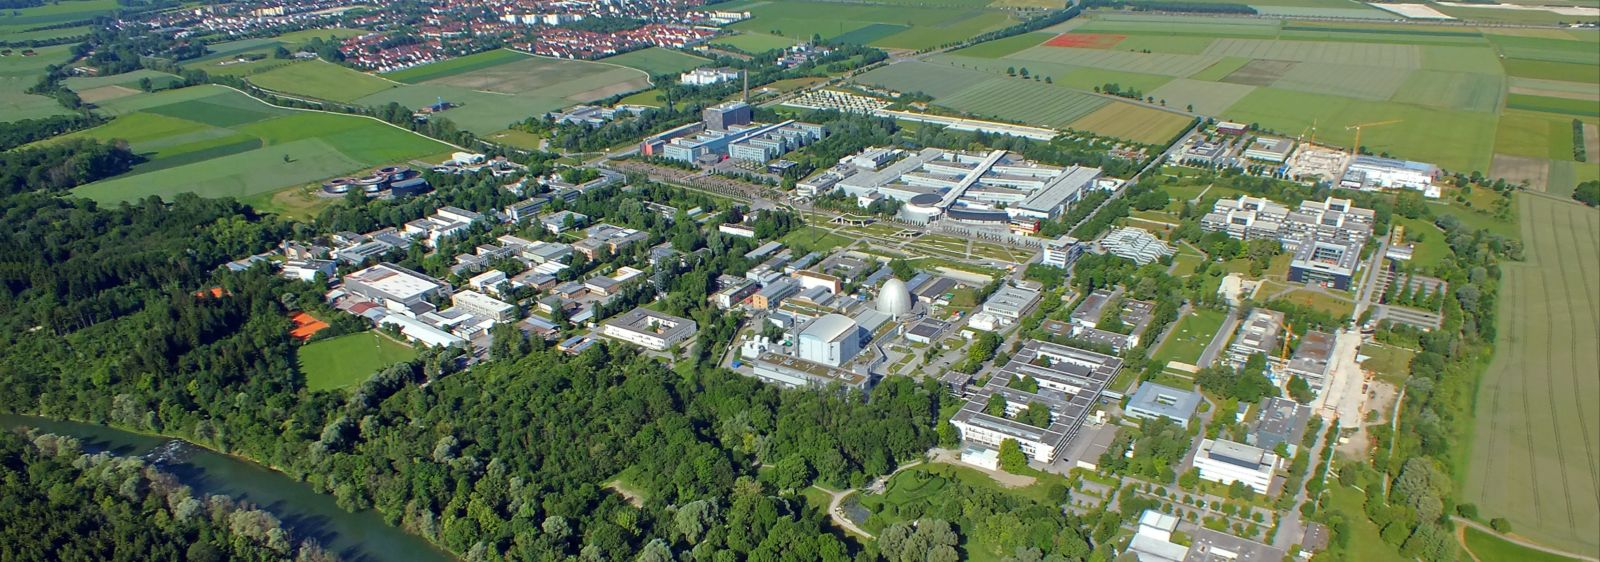 The campus of the Technical University of Munich in Garching, with the city of Garching in the background.